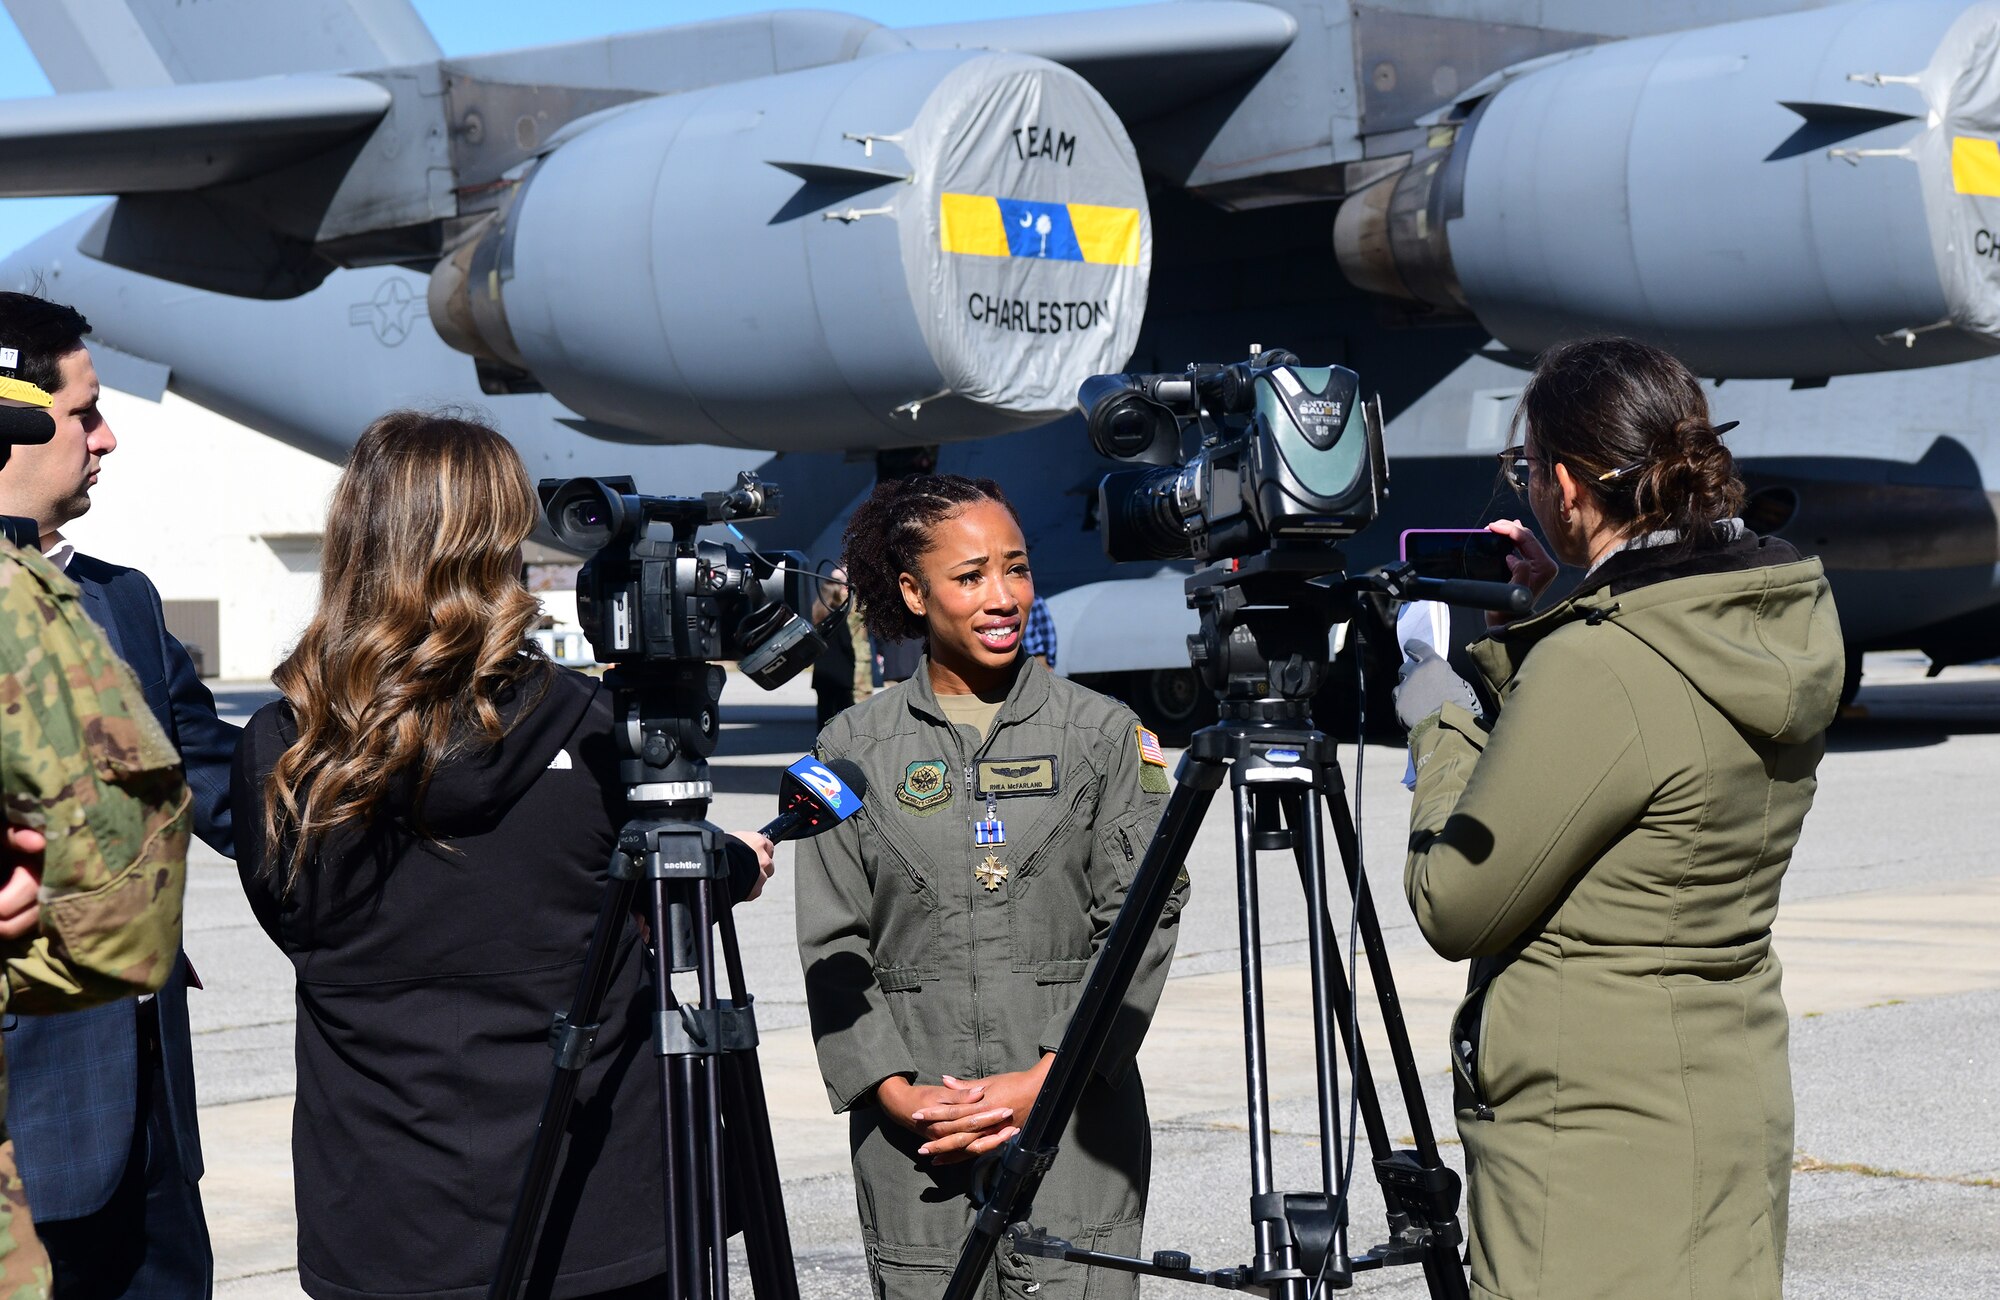 An Airman is interviewed by media.